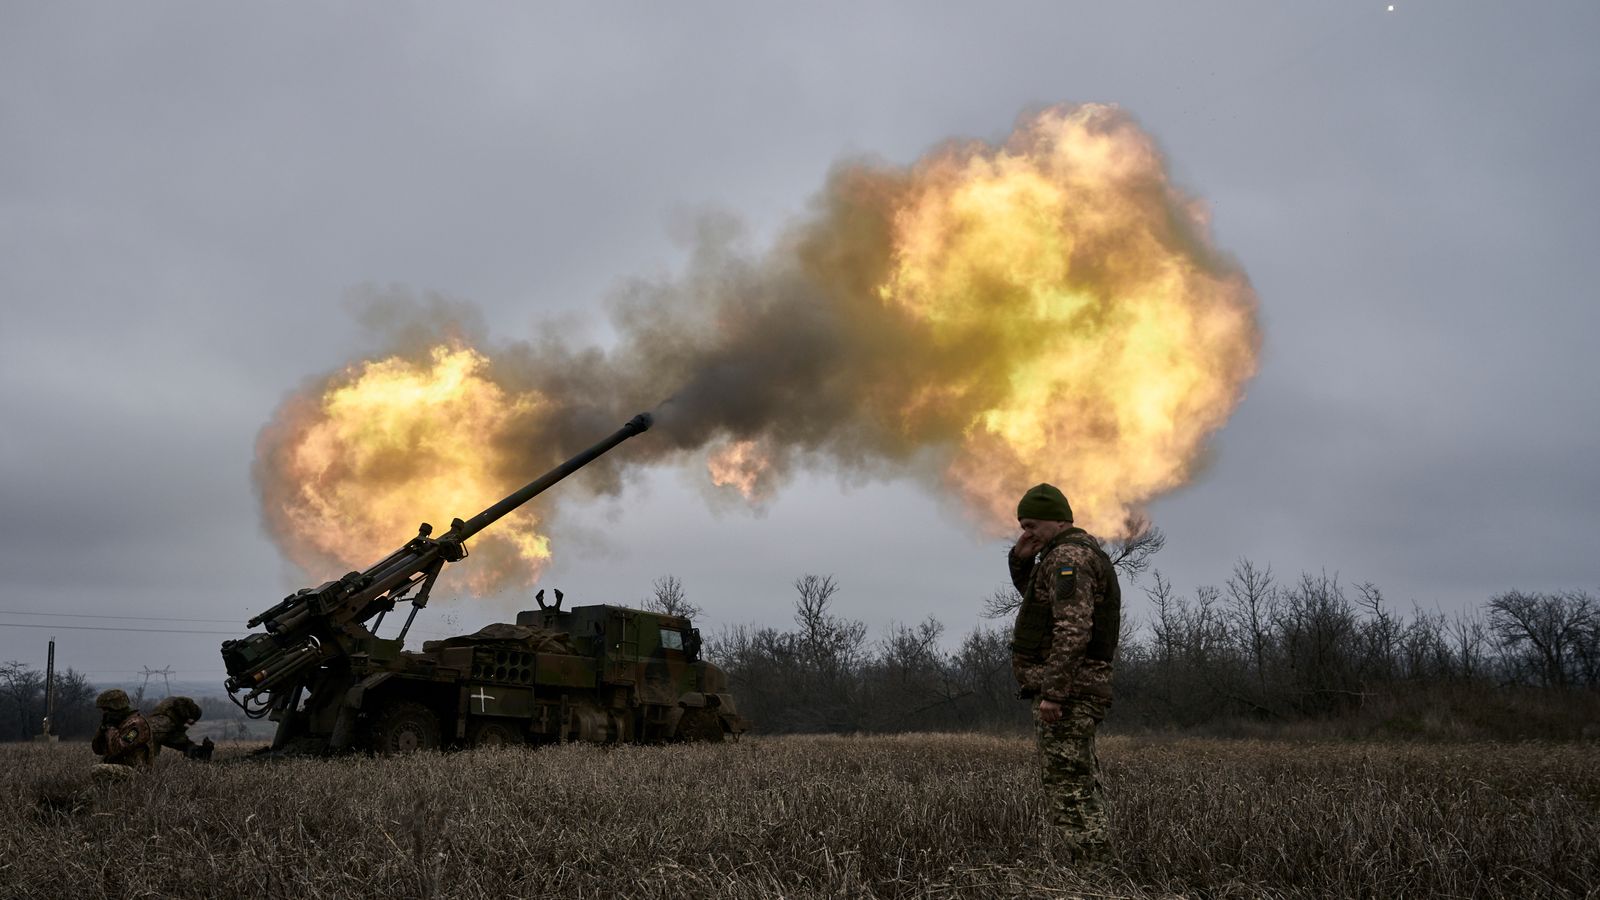 was a lack of ukrainian ammunition to blame for russia taking avdiivka?